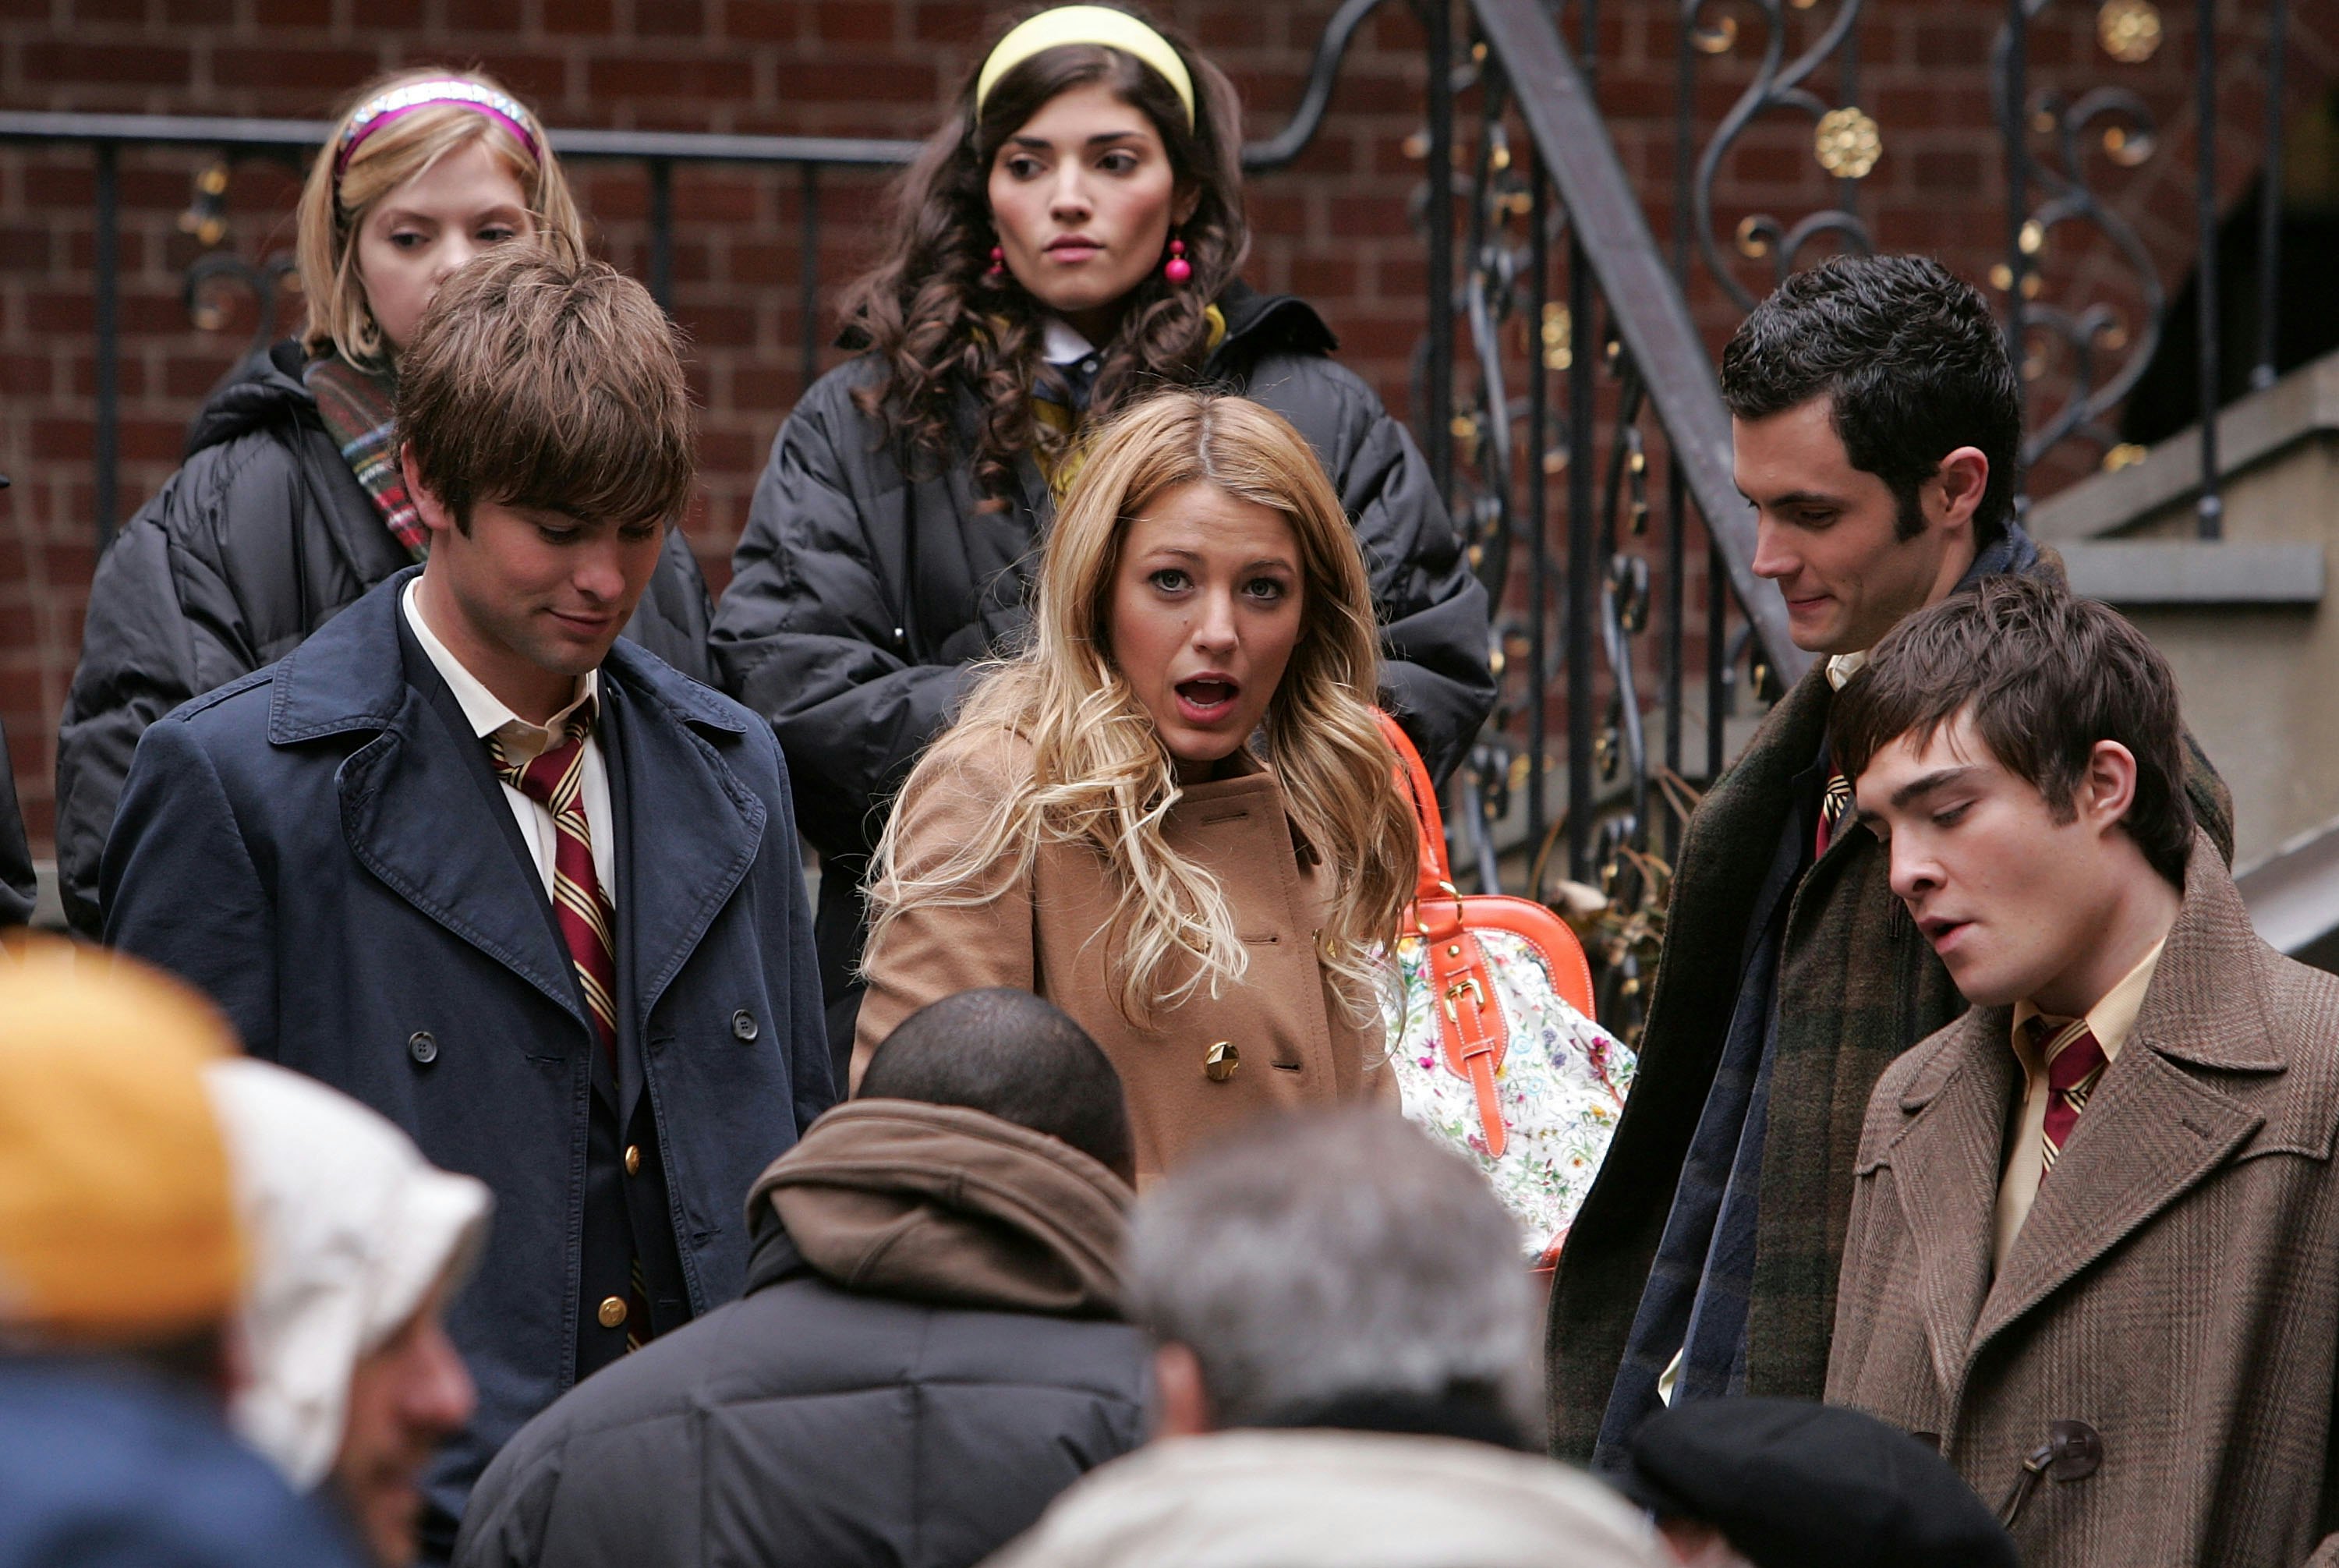 gossip girl cast dating in real life